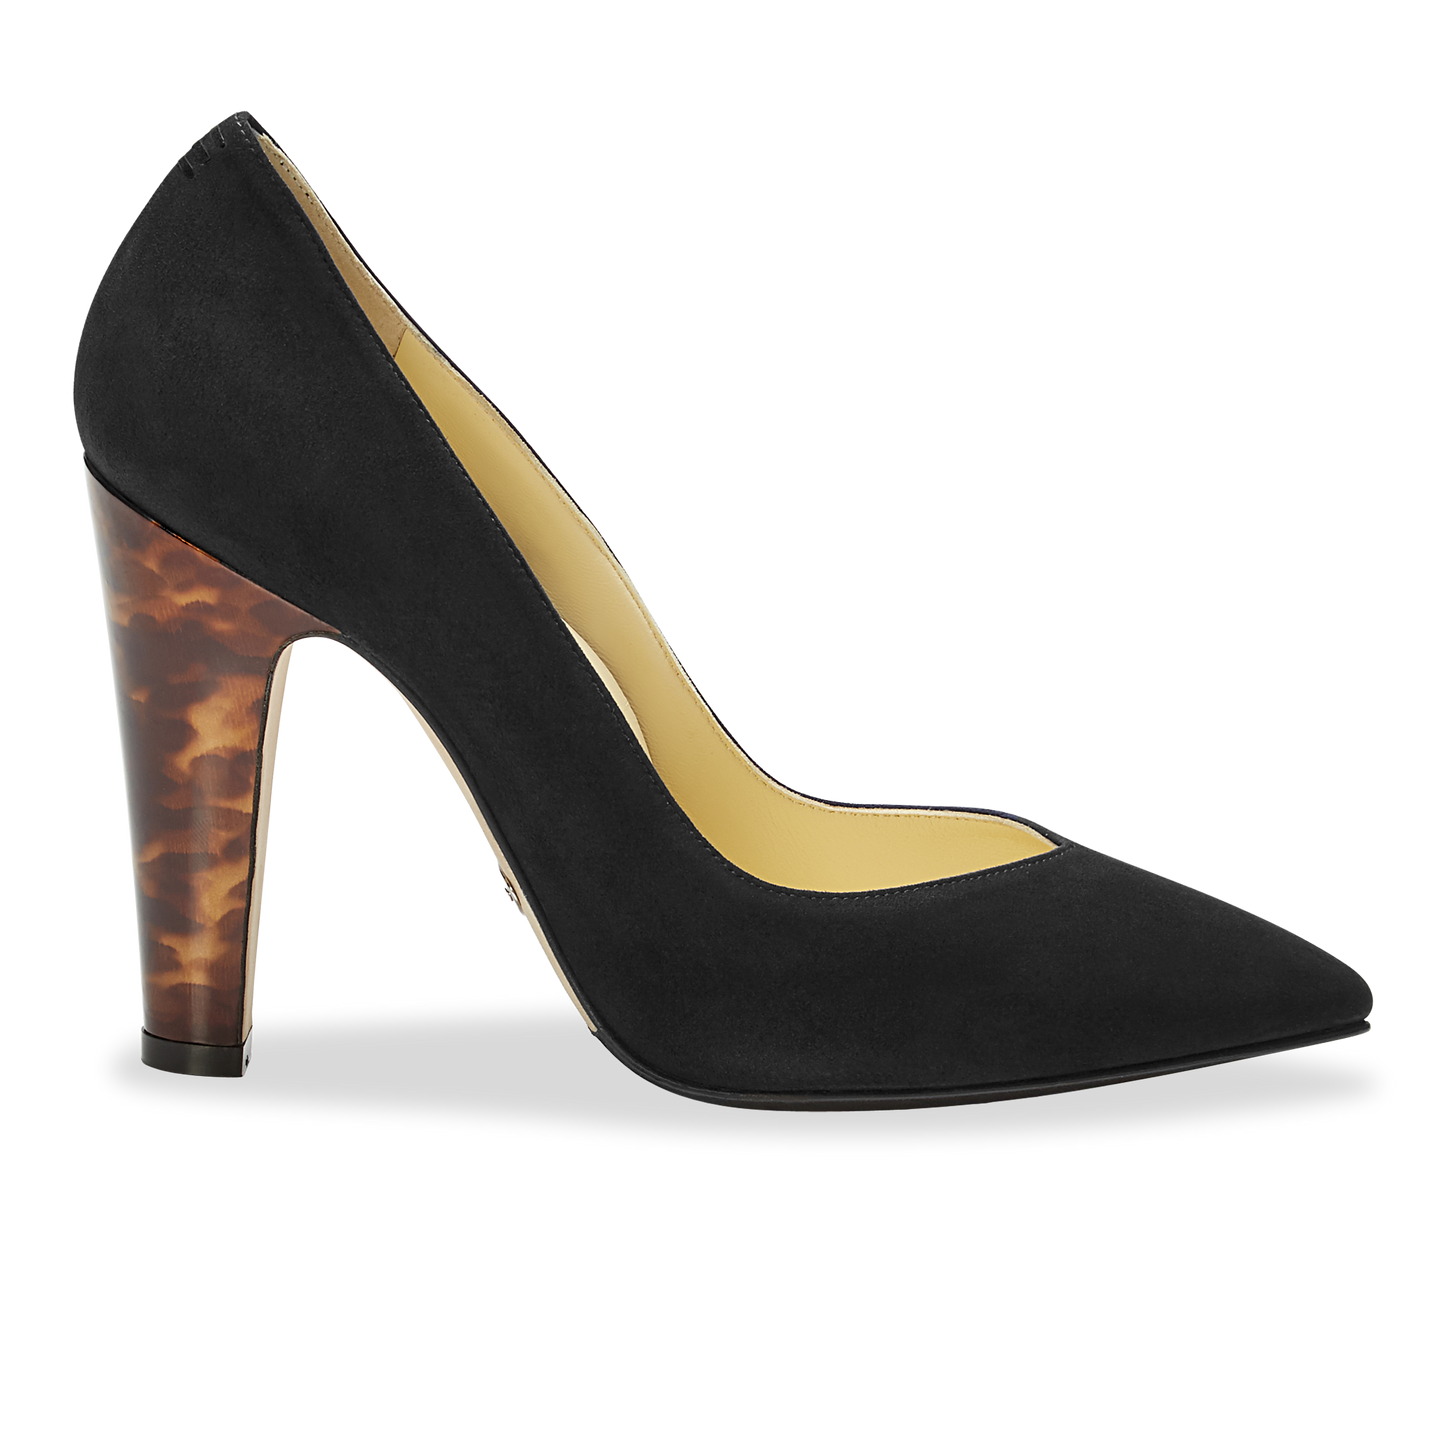 100mm Italian Made Pointed Toe Jay Pump in Black Suede